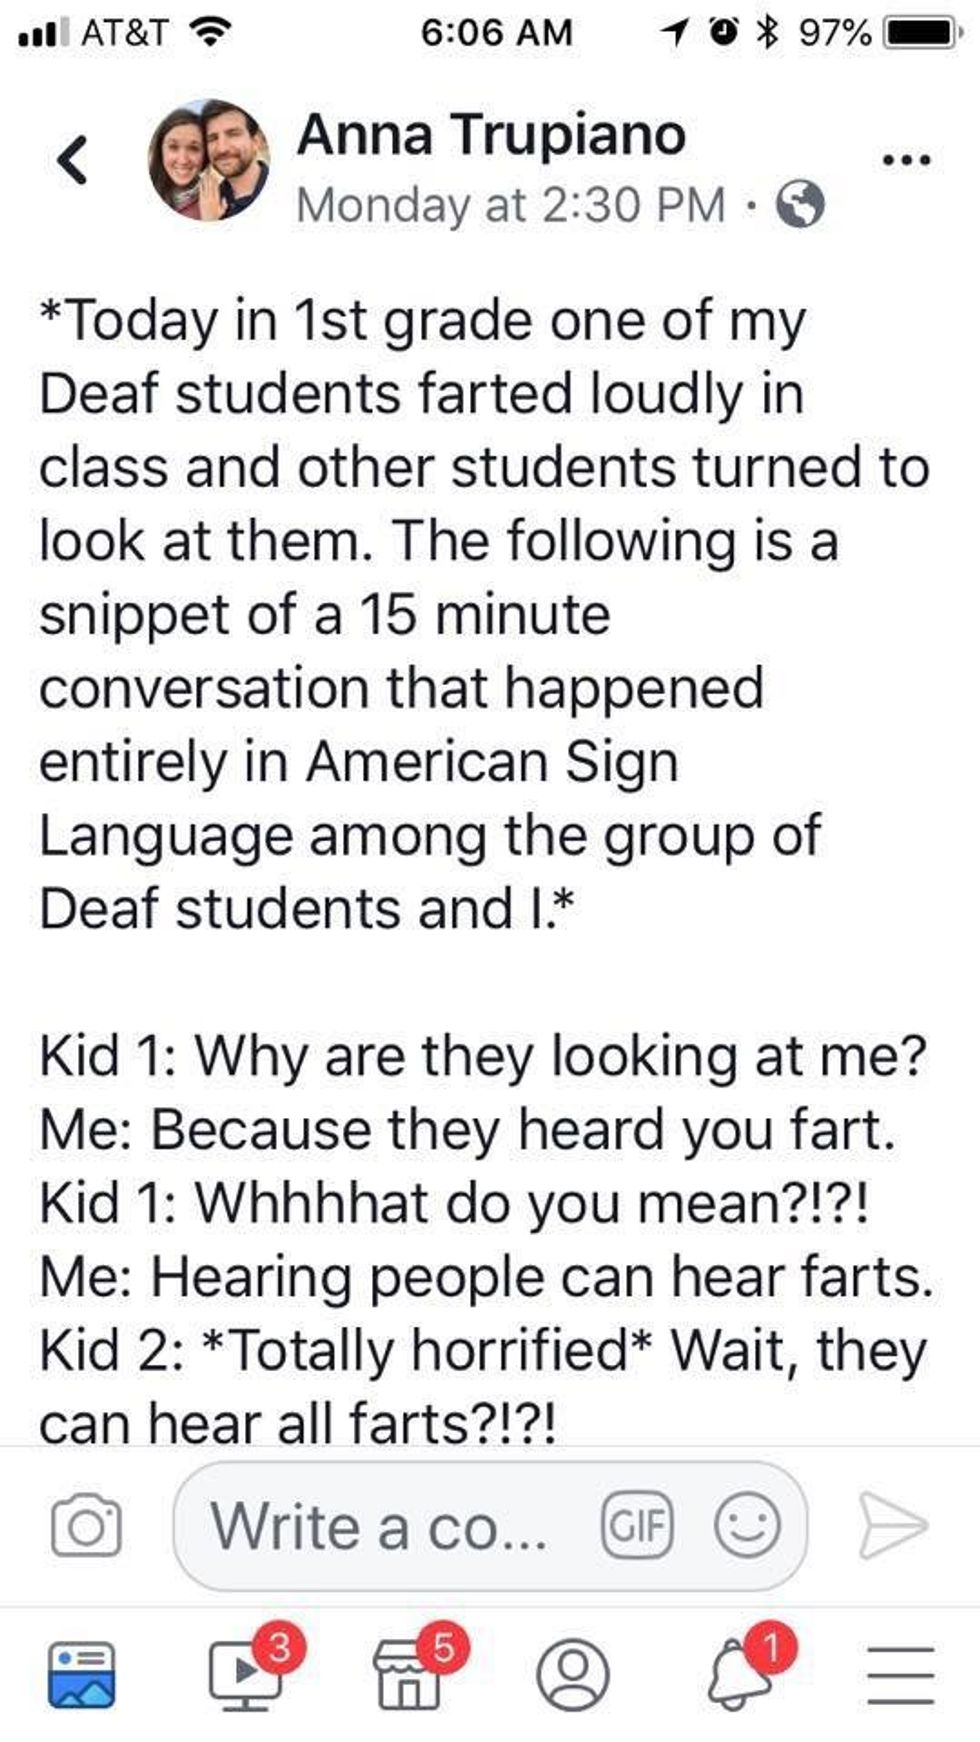 1st grade, farts, passing gas